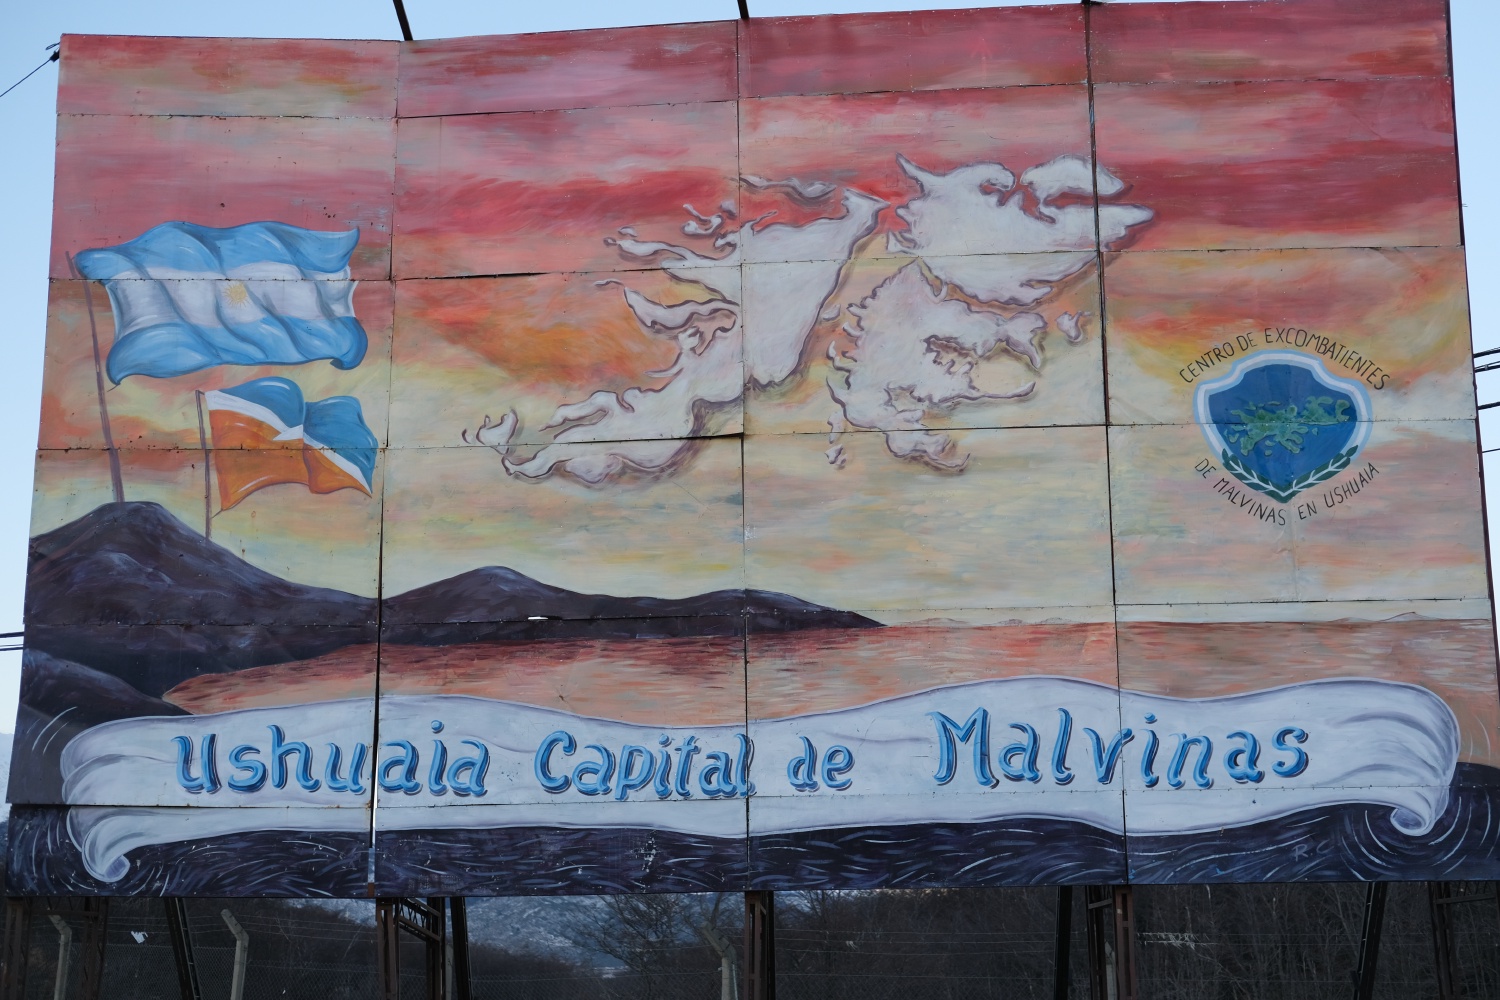 Apparently, Ushuaia is the capital of the province of Tierra del Fuego, Antarctica and South Atlantic Islands, and therefore of the Malvinas Islands (Falkland Islands)